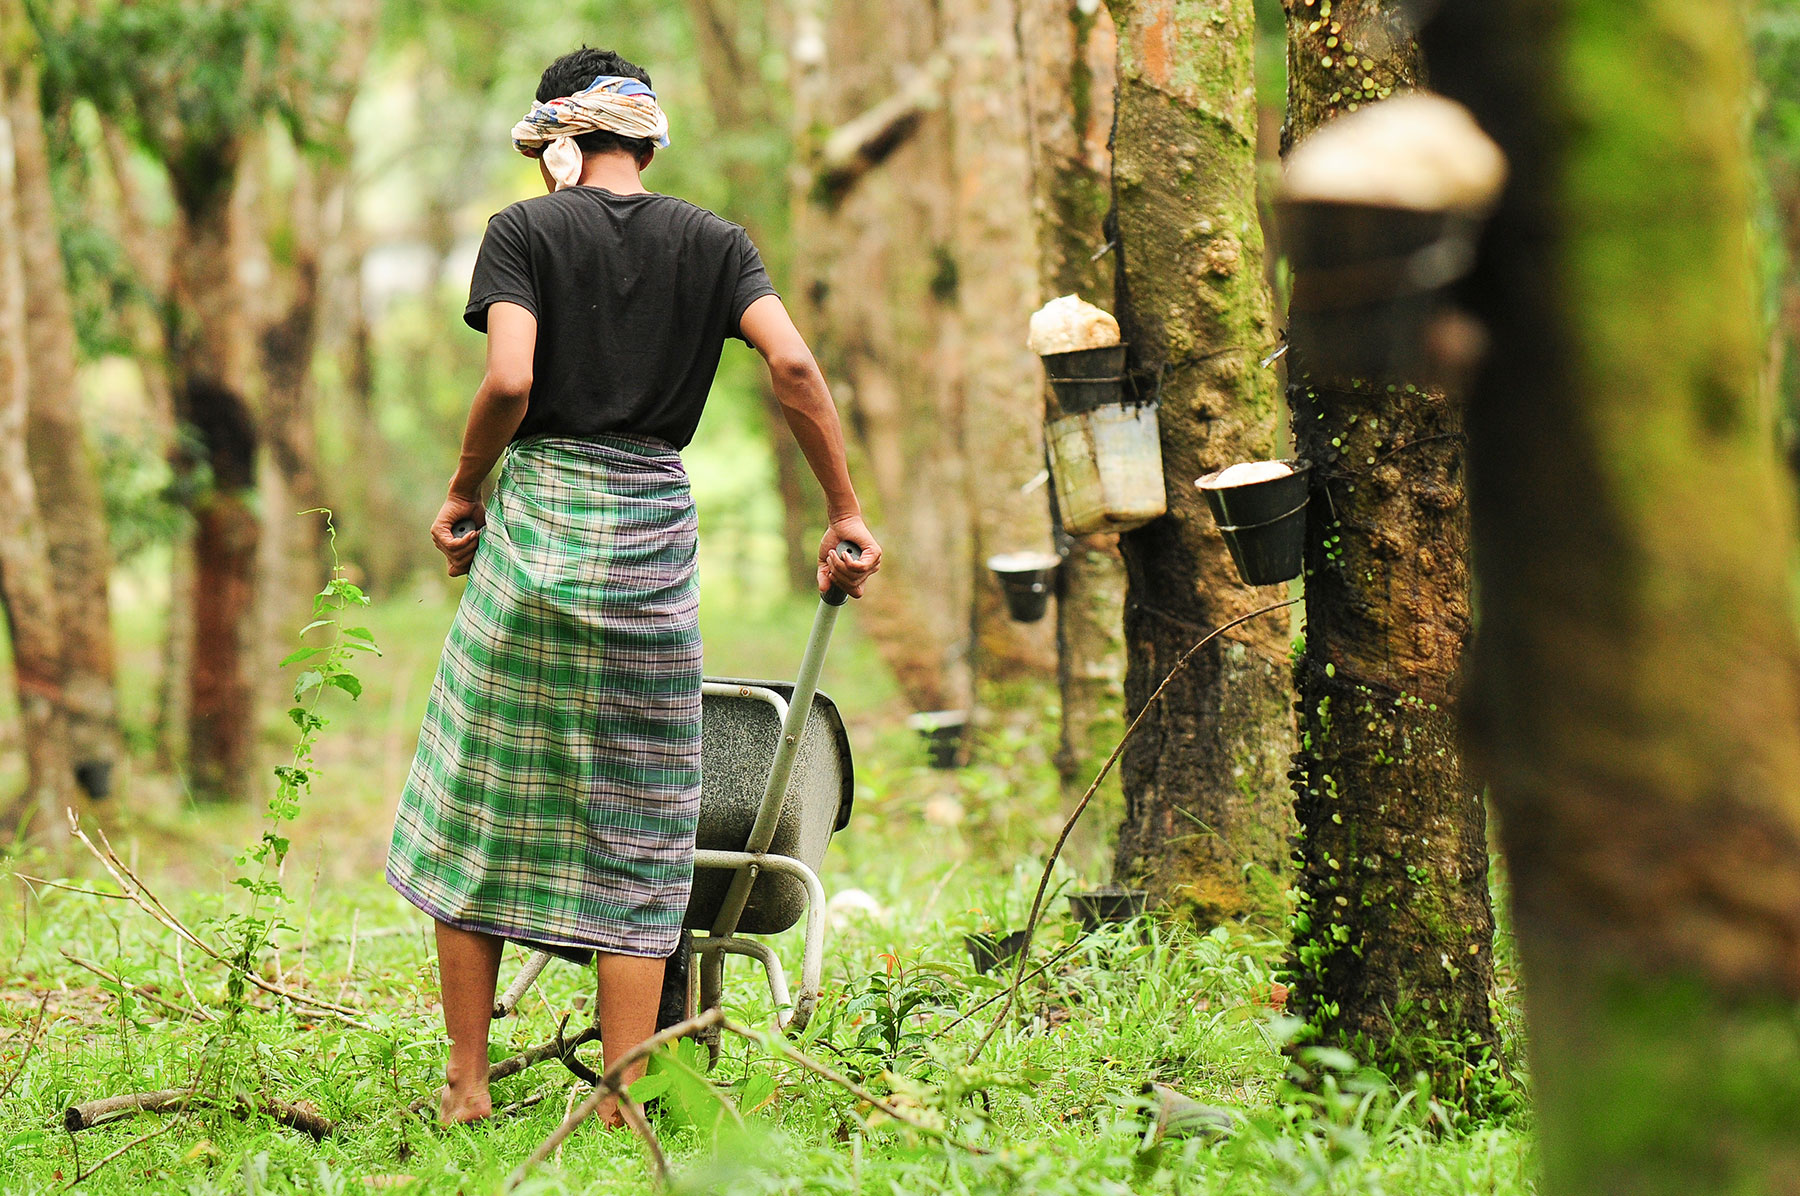 Rubber worker collecting sap